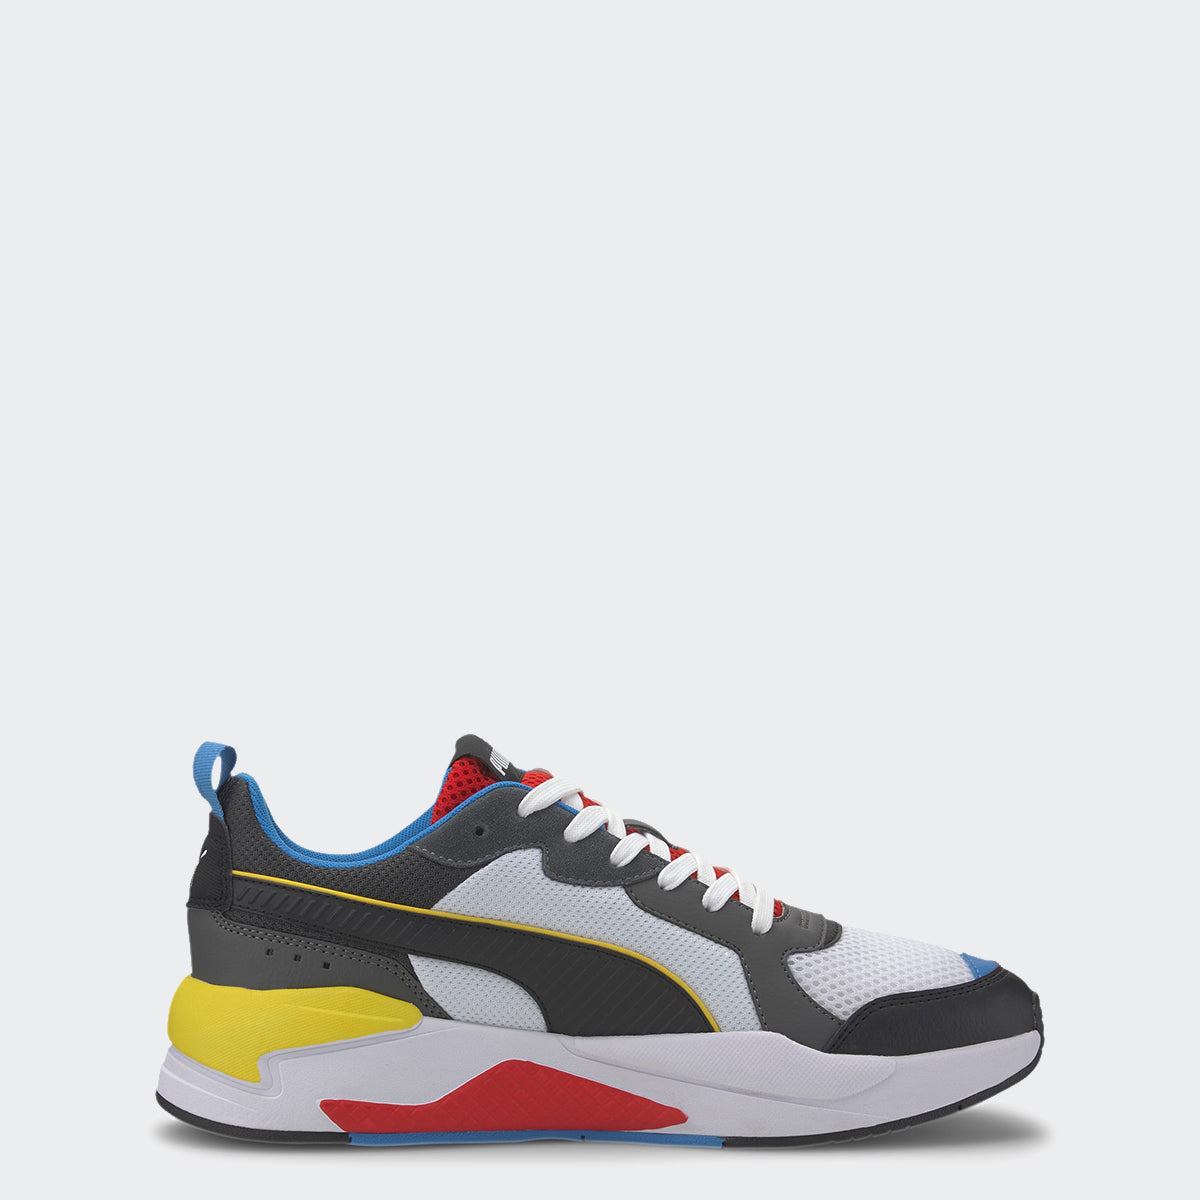 puma sneakers colorful